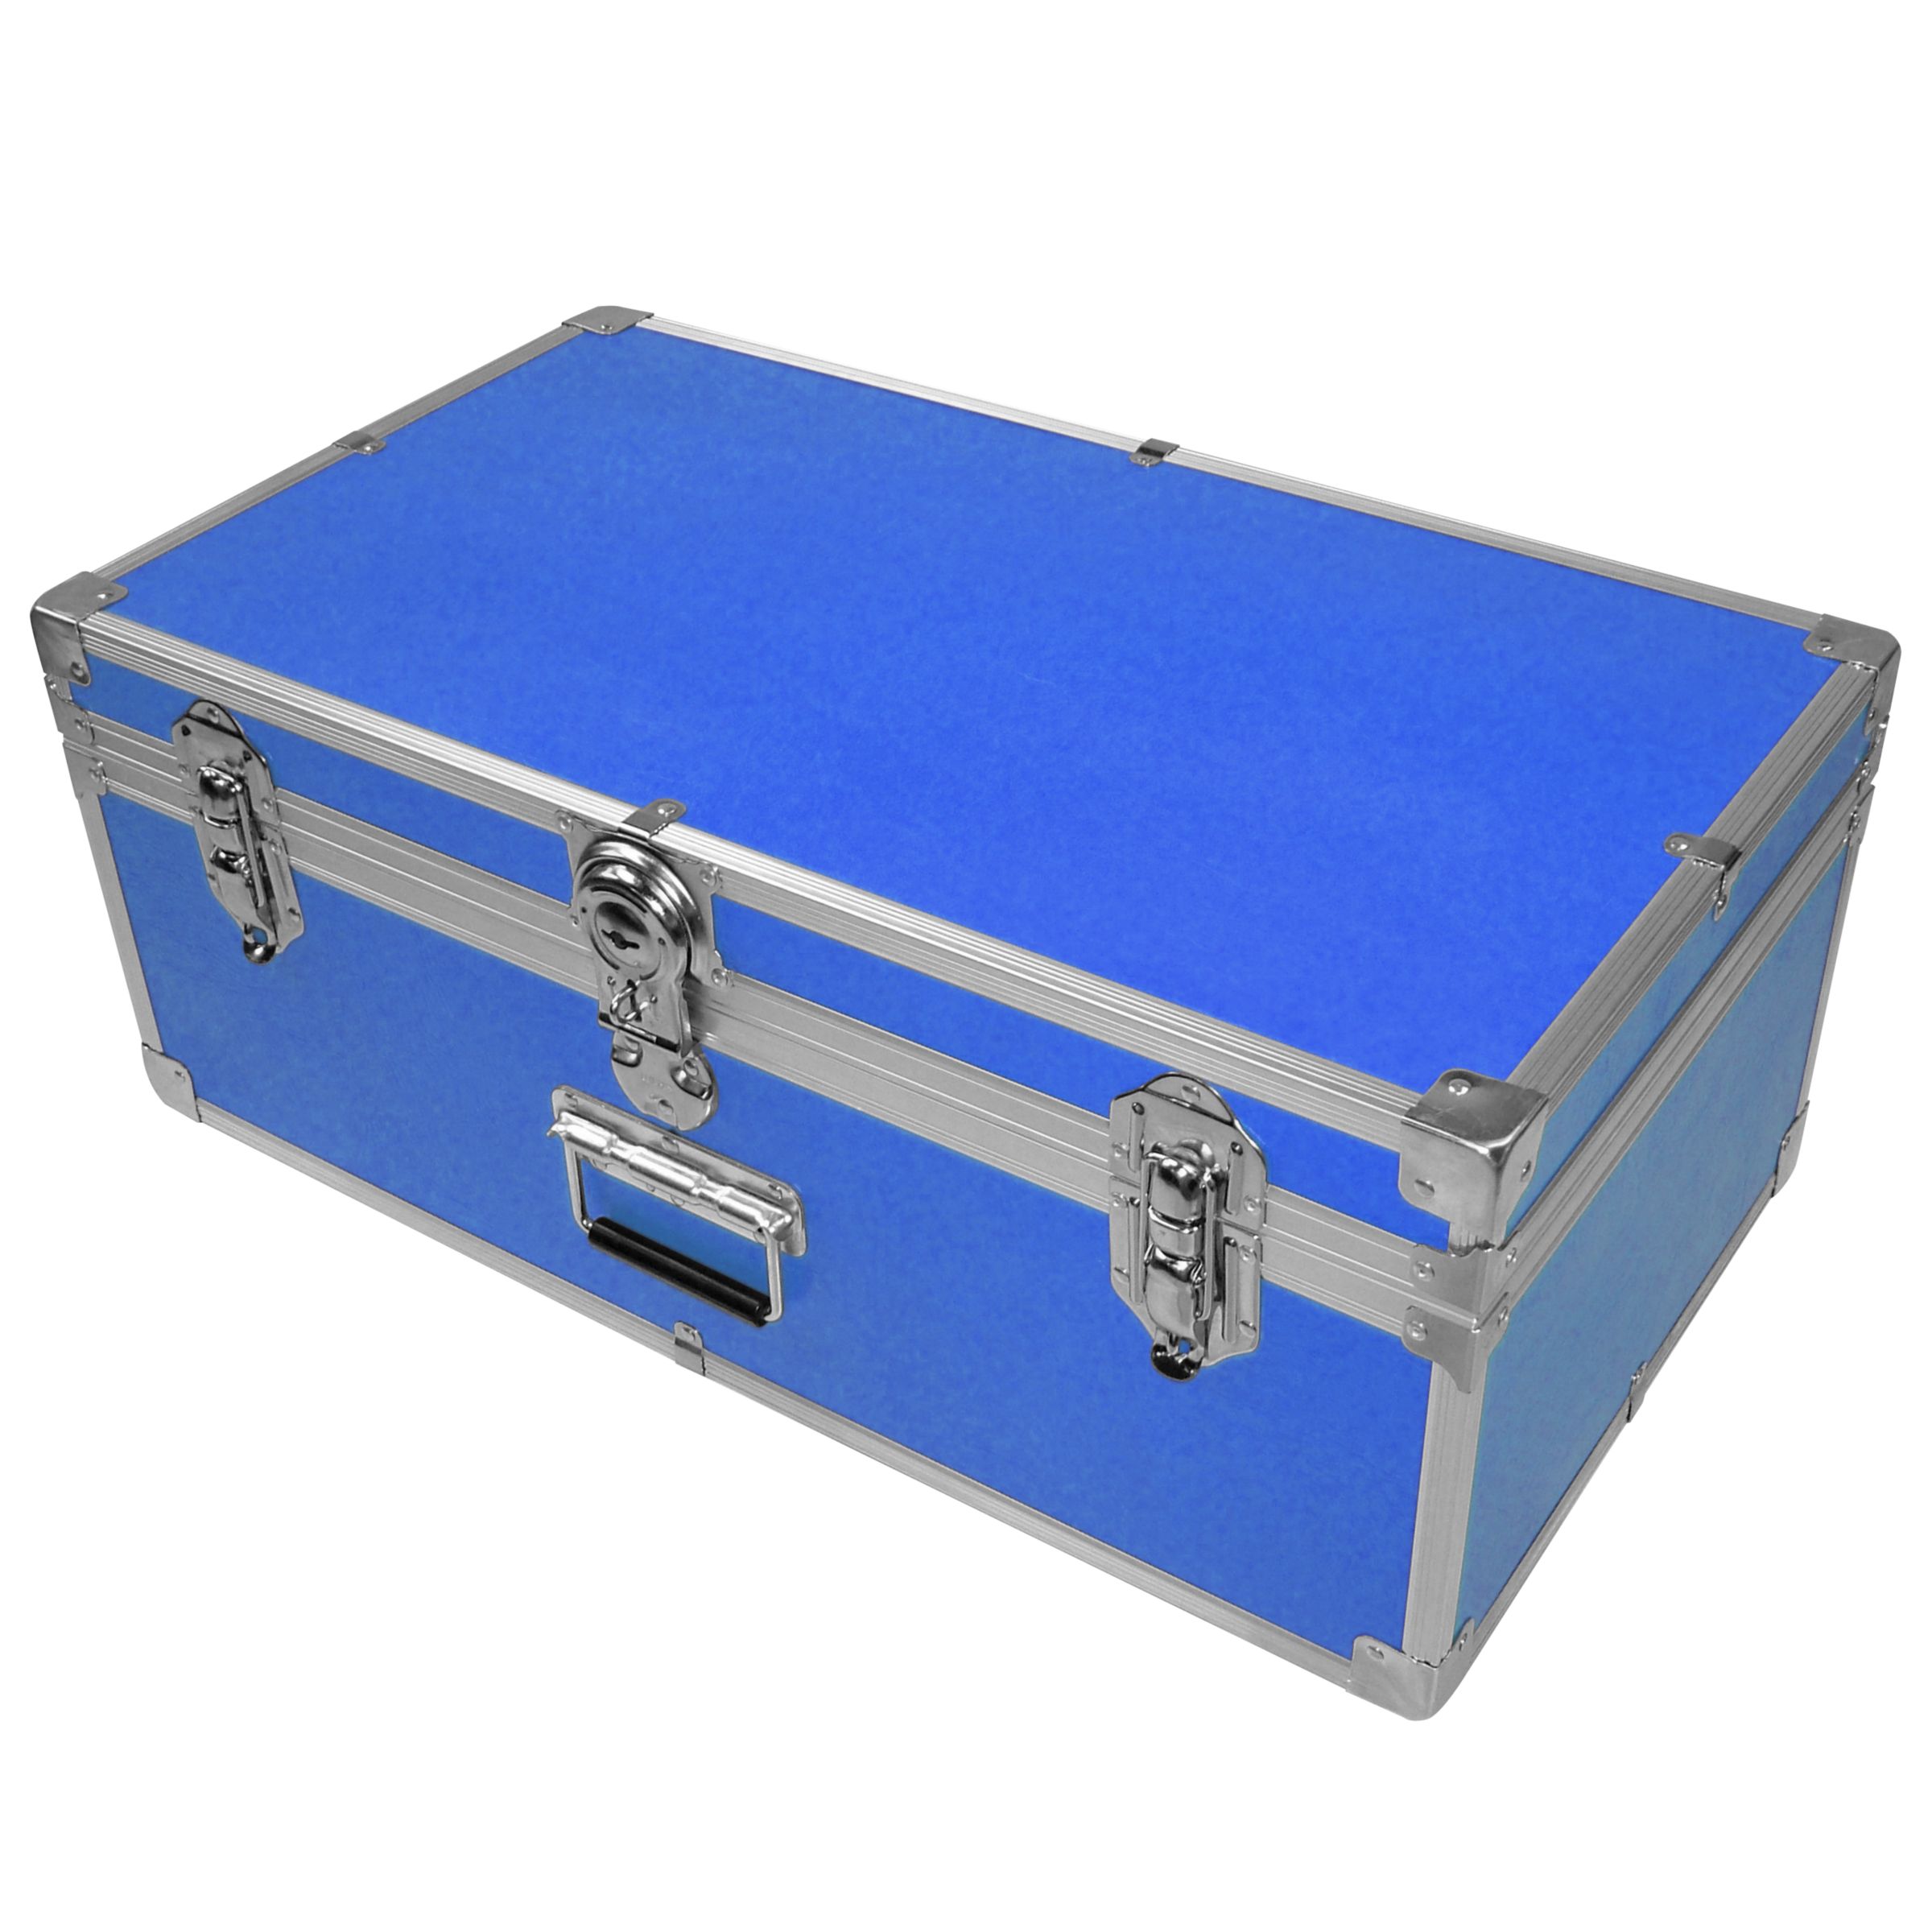 John Lewis Fortified Attache Trunk, Royal Blue at JohnLewis